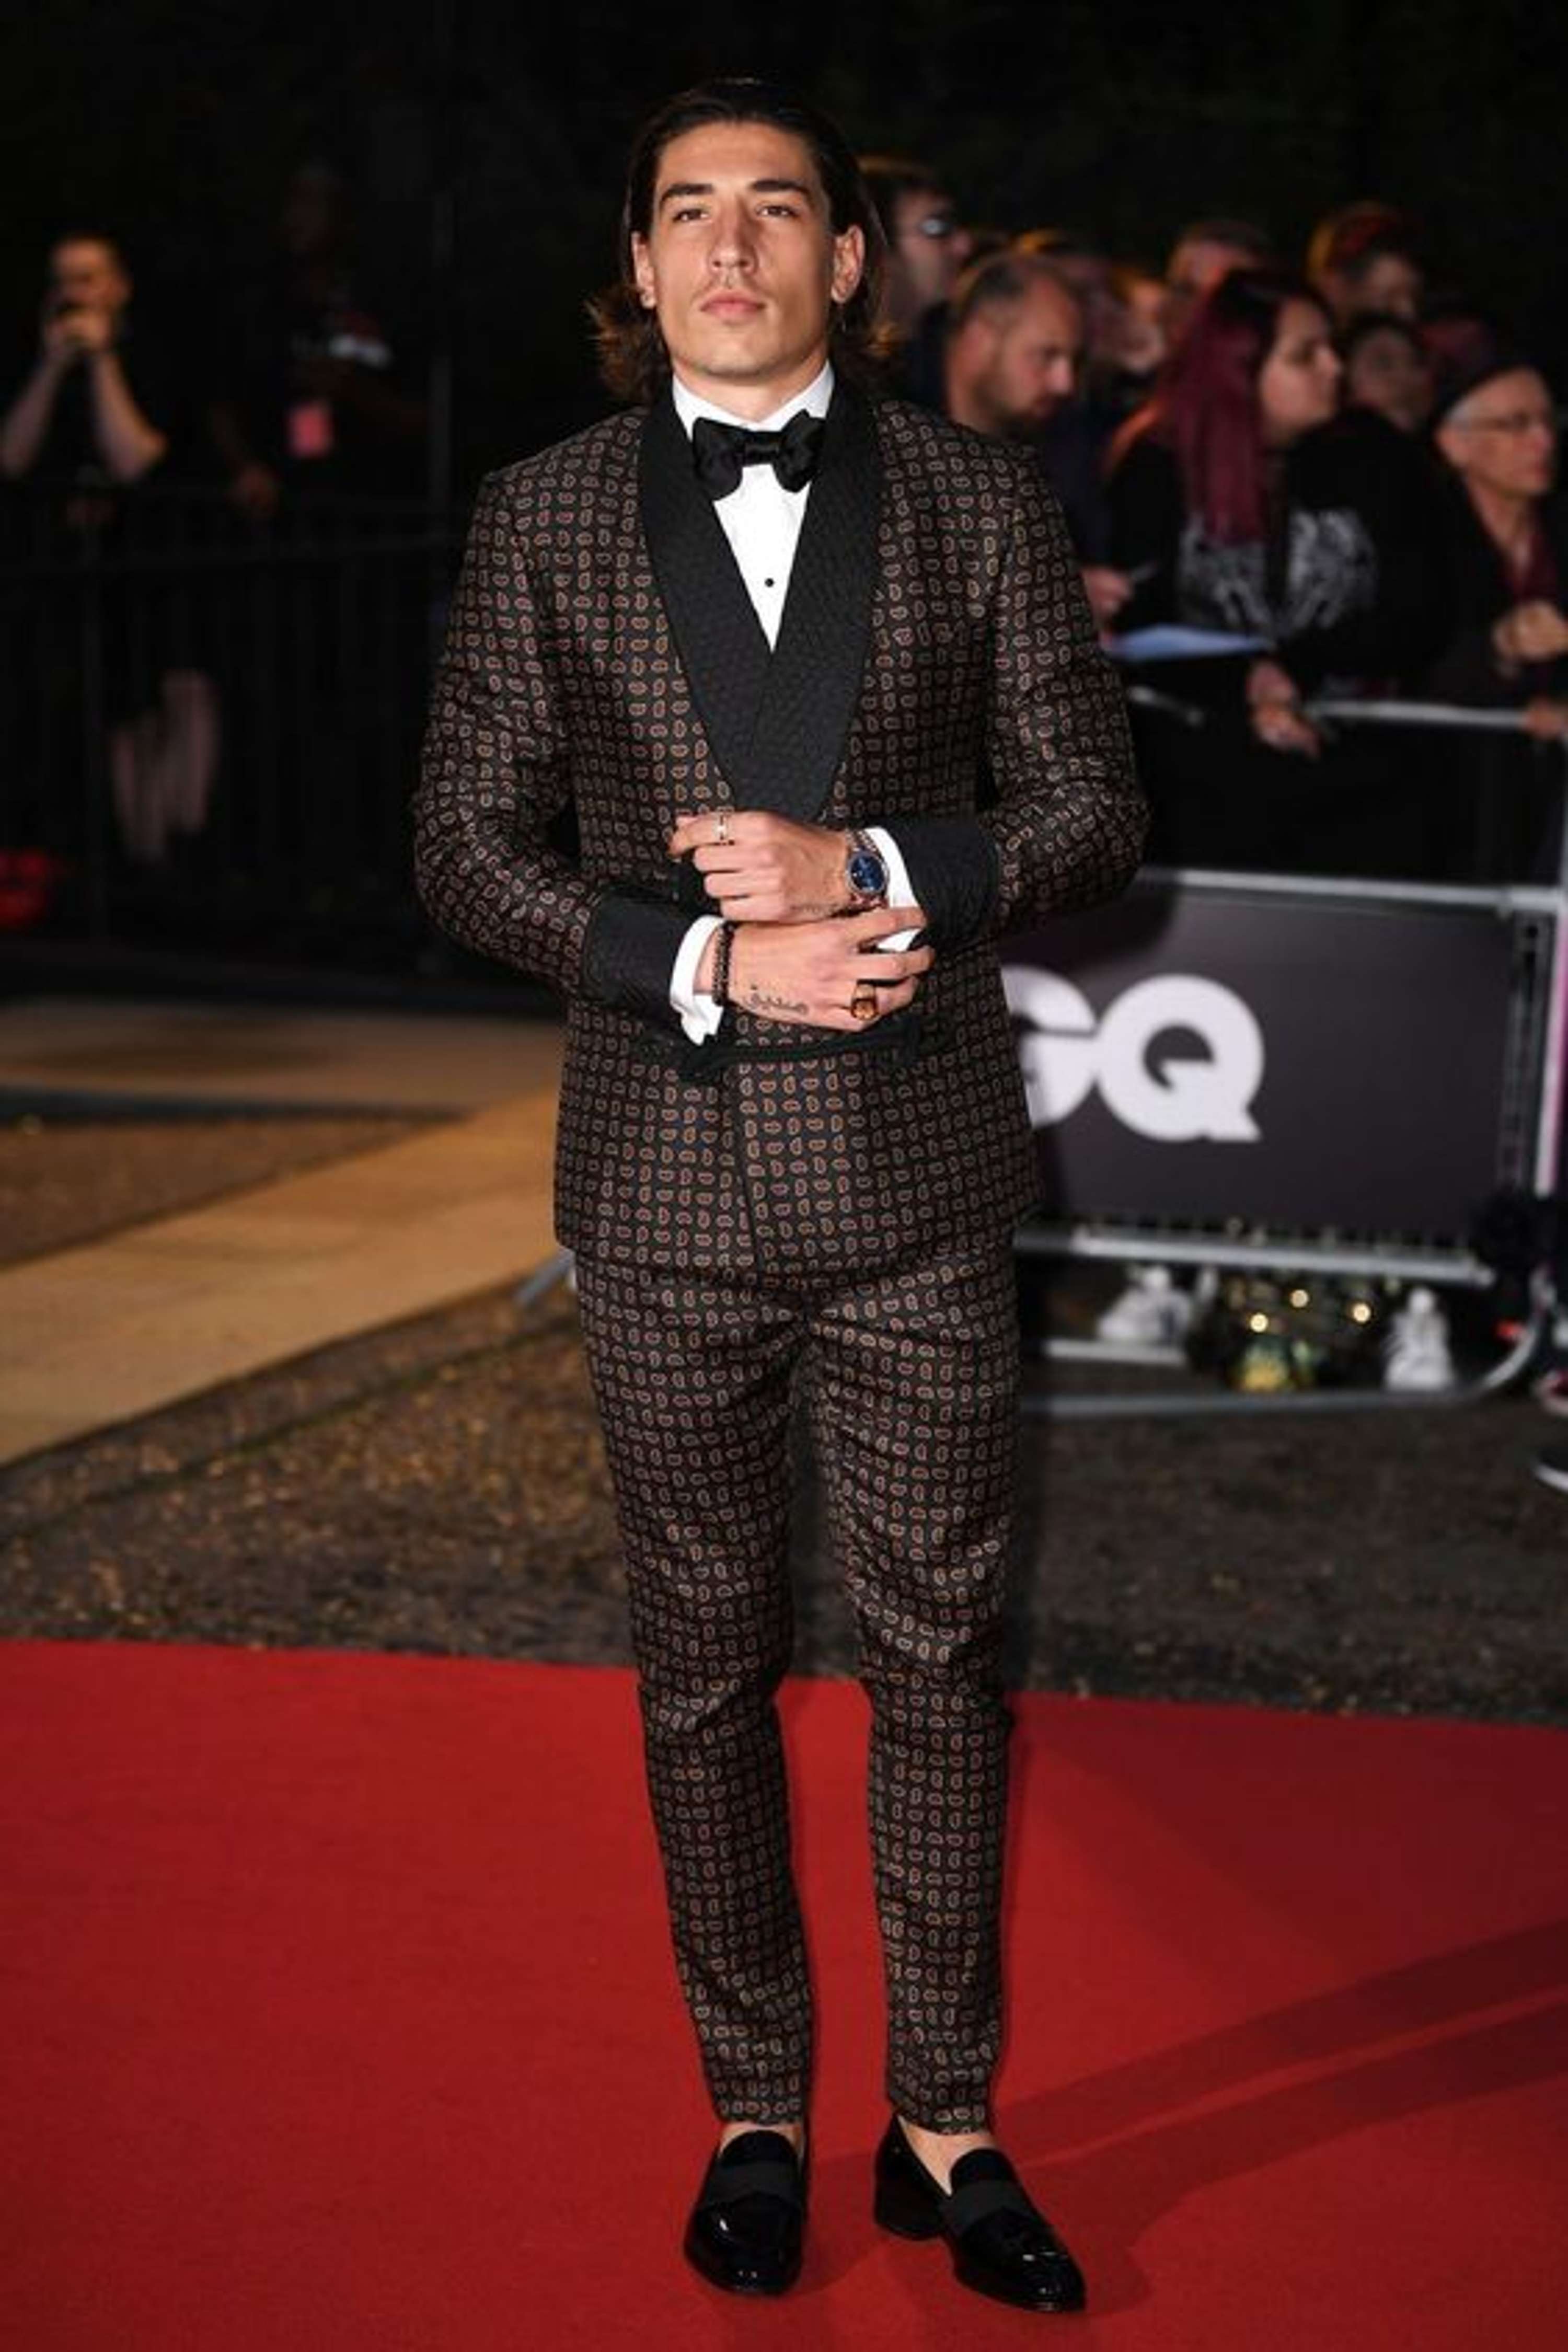 Hector Bellerin at the GQ Men of the Year Awards